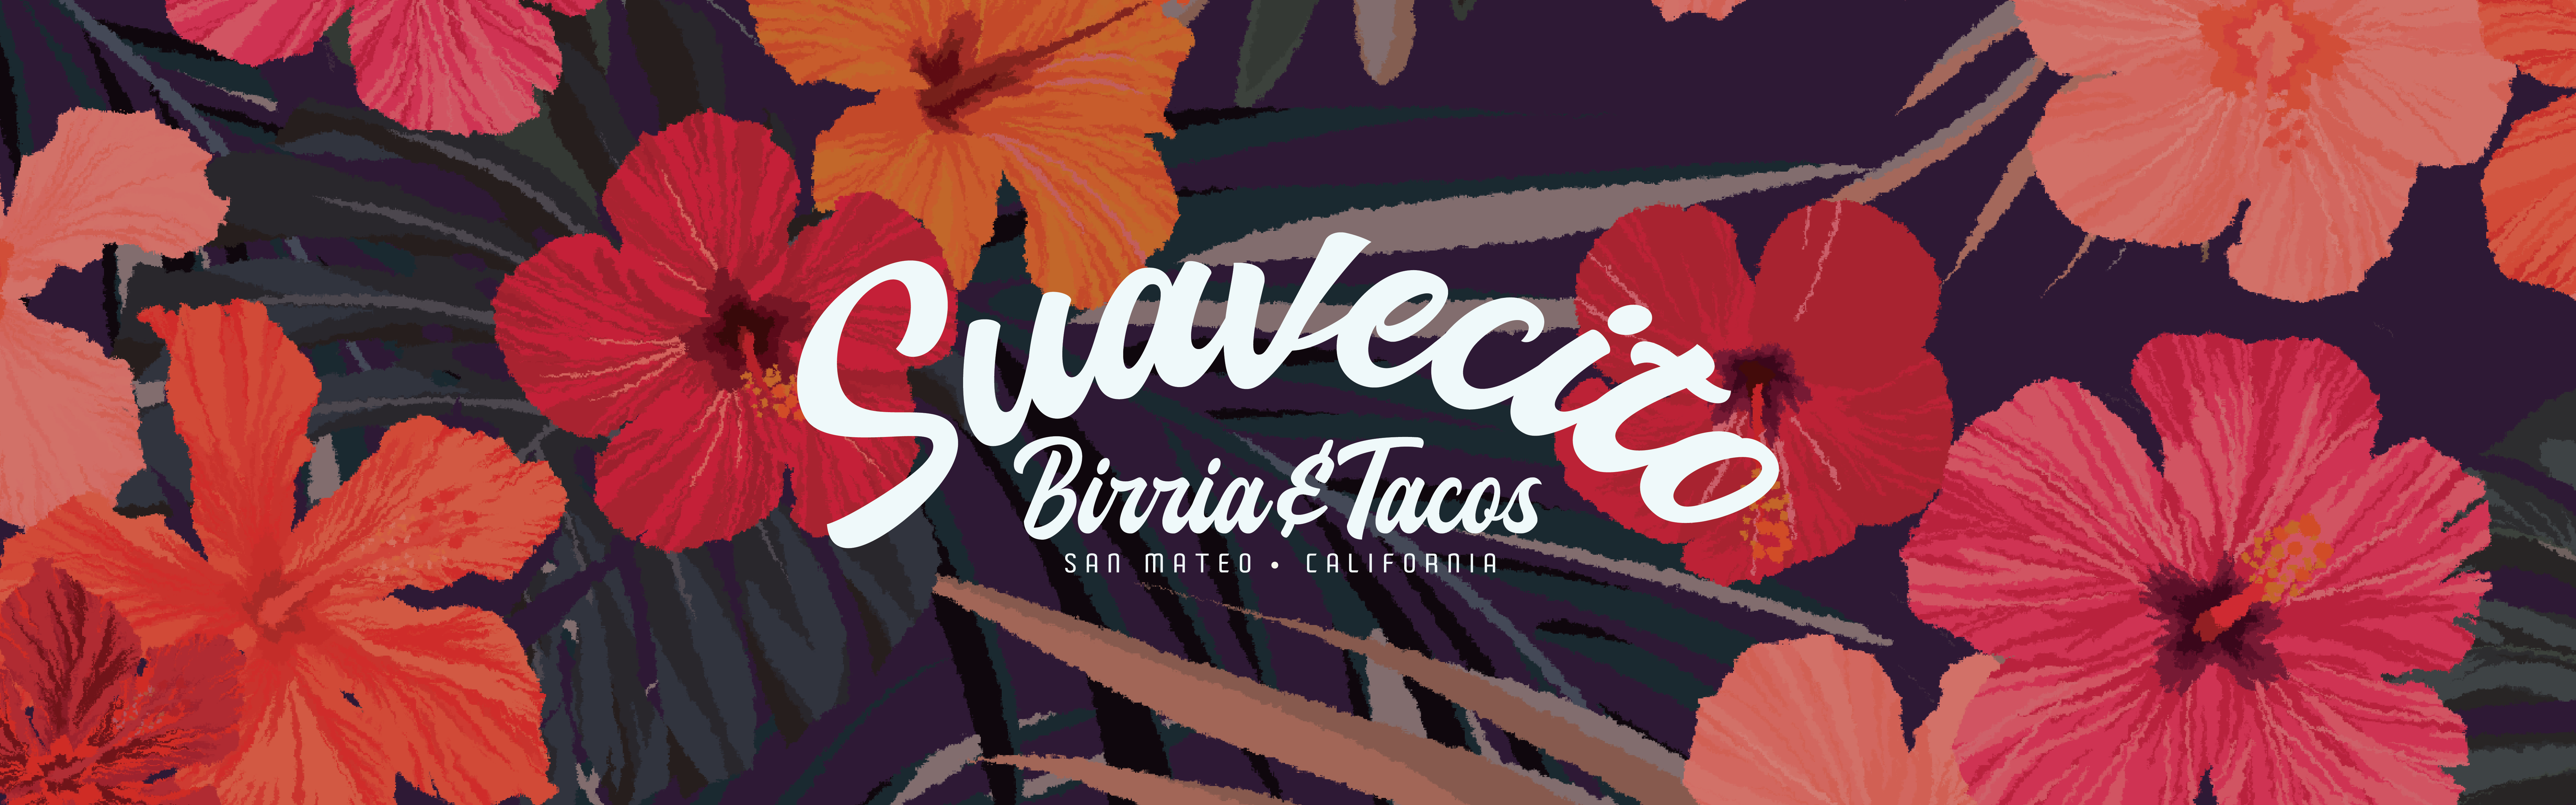 A floral graphic design featuring the brand name "Suavecito Birria & Tacos" in script lettering, set against a backdrop of dark leaves and bright red flowers, with the location "san